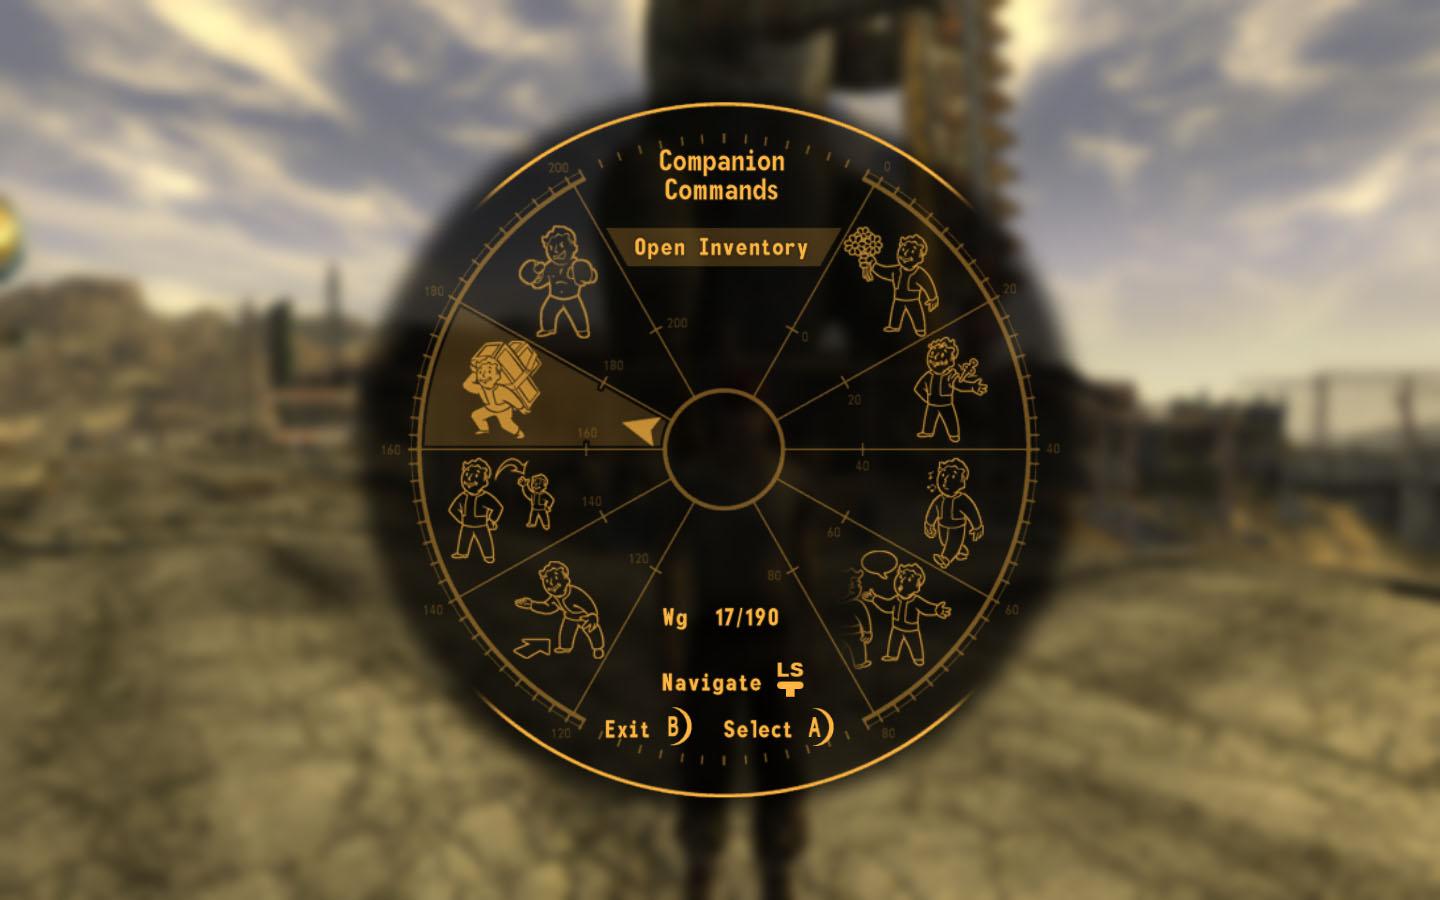 Fallout New Vegas System Requirements - Can I Run It? - PCGameBenchmark